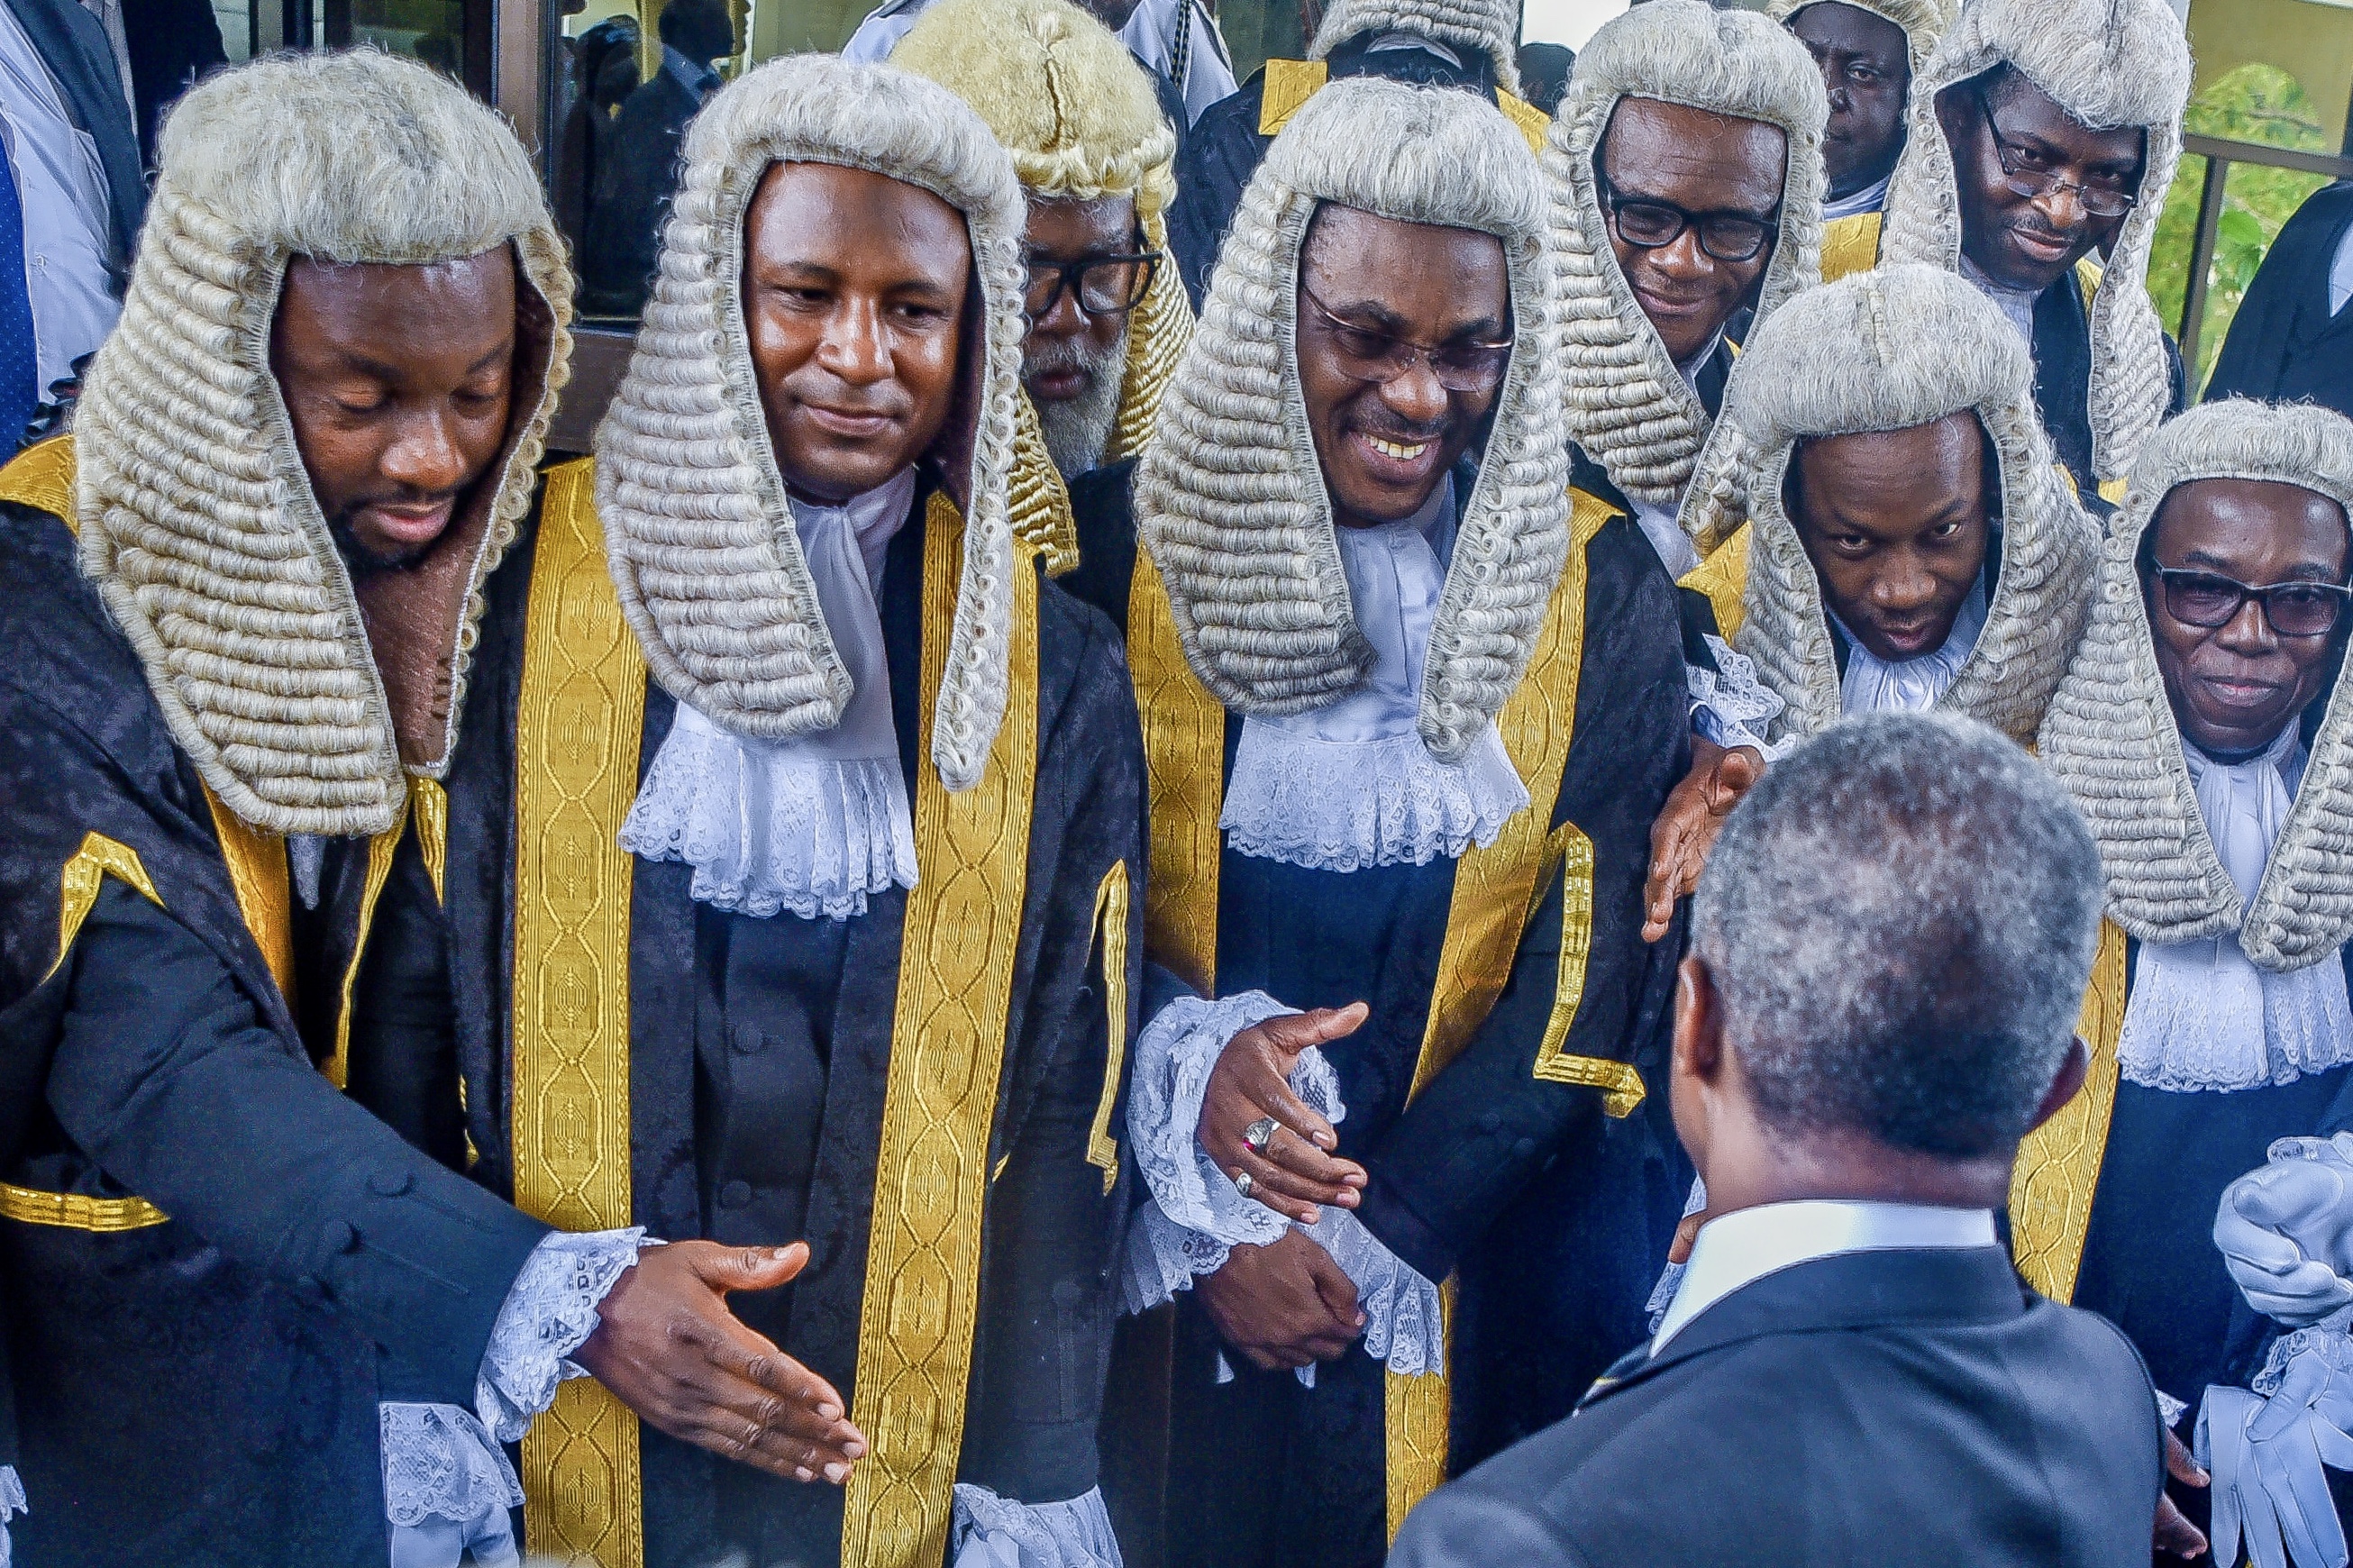 VP Osinbajo Attends Supreme Court Special Session For 2019/2020 Legal Year In Abuja On 23/09/2019